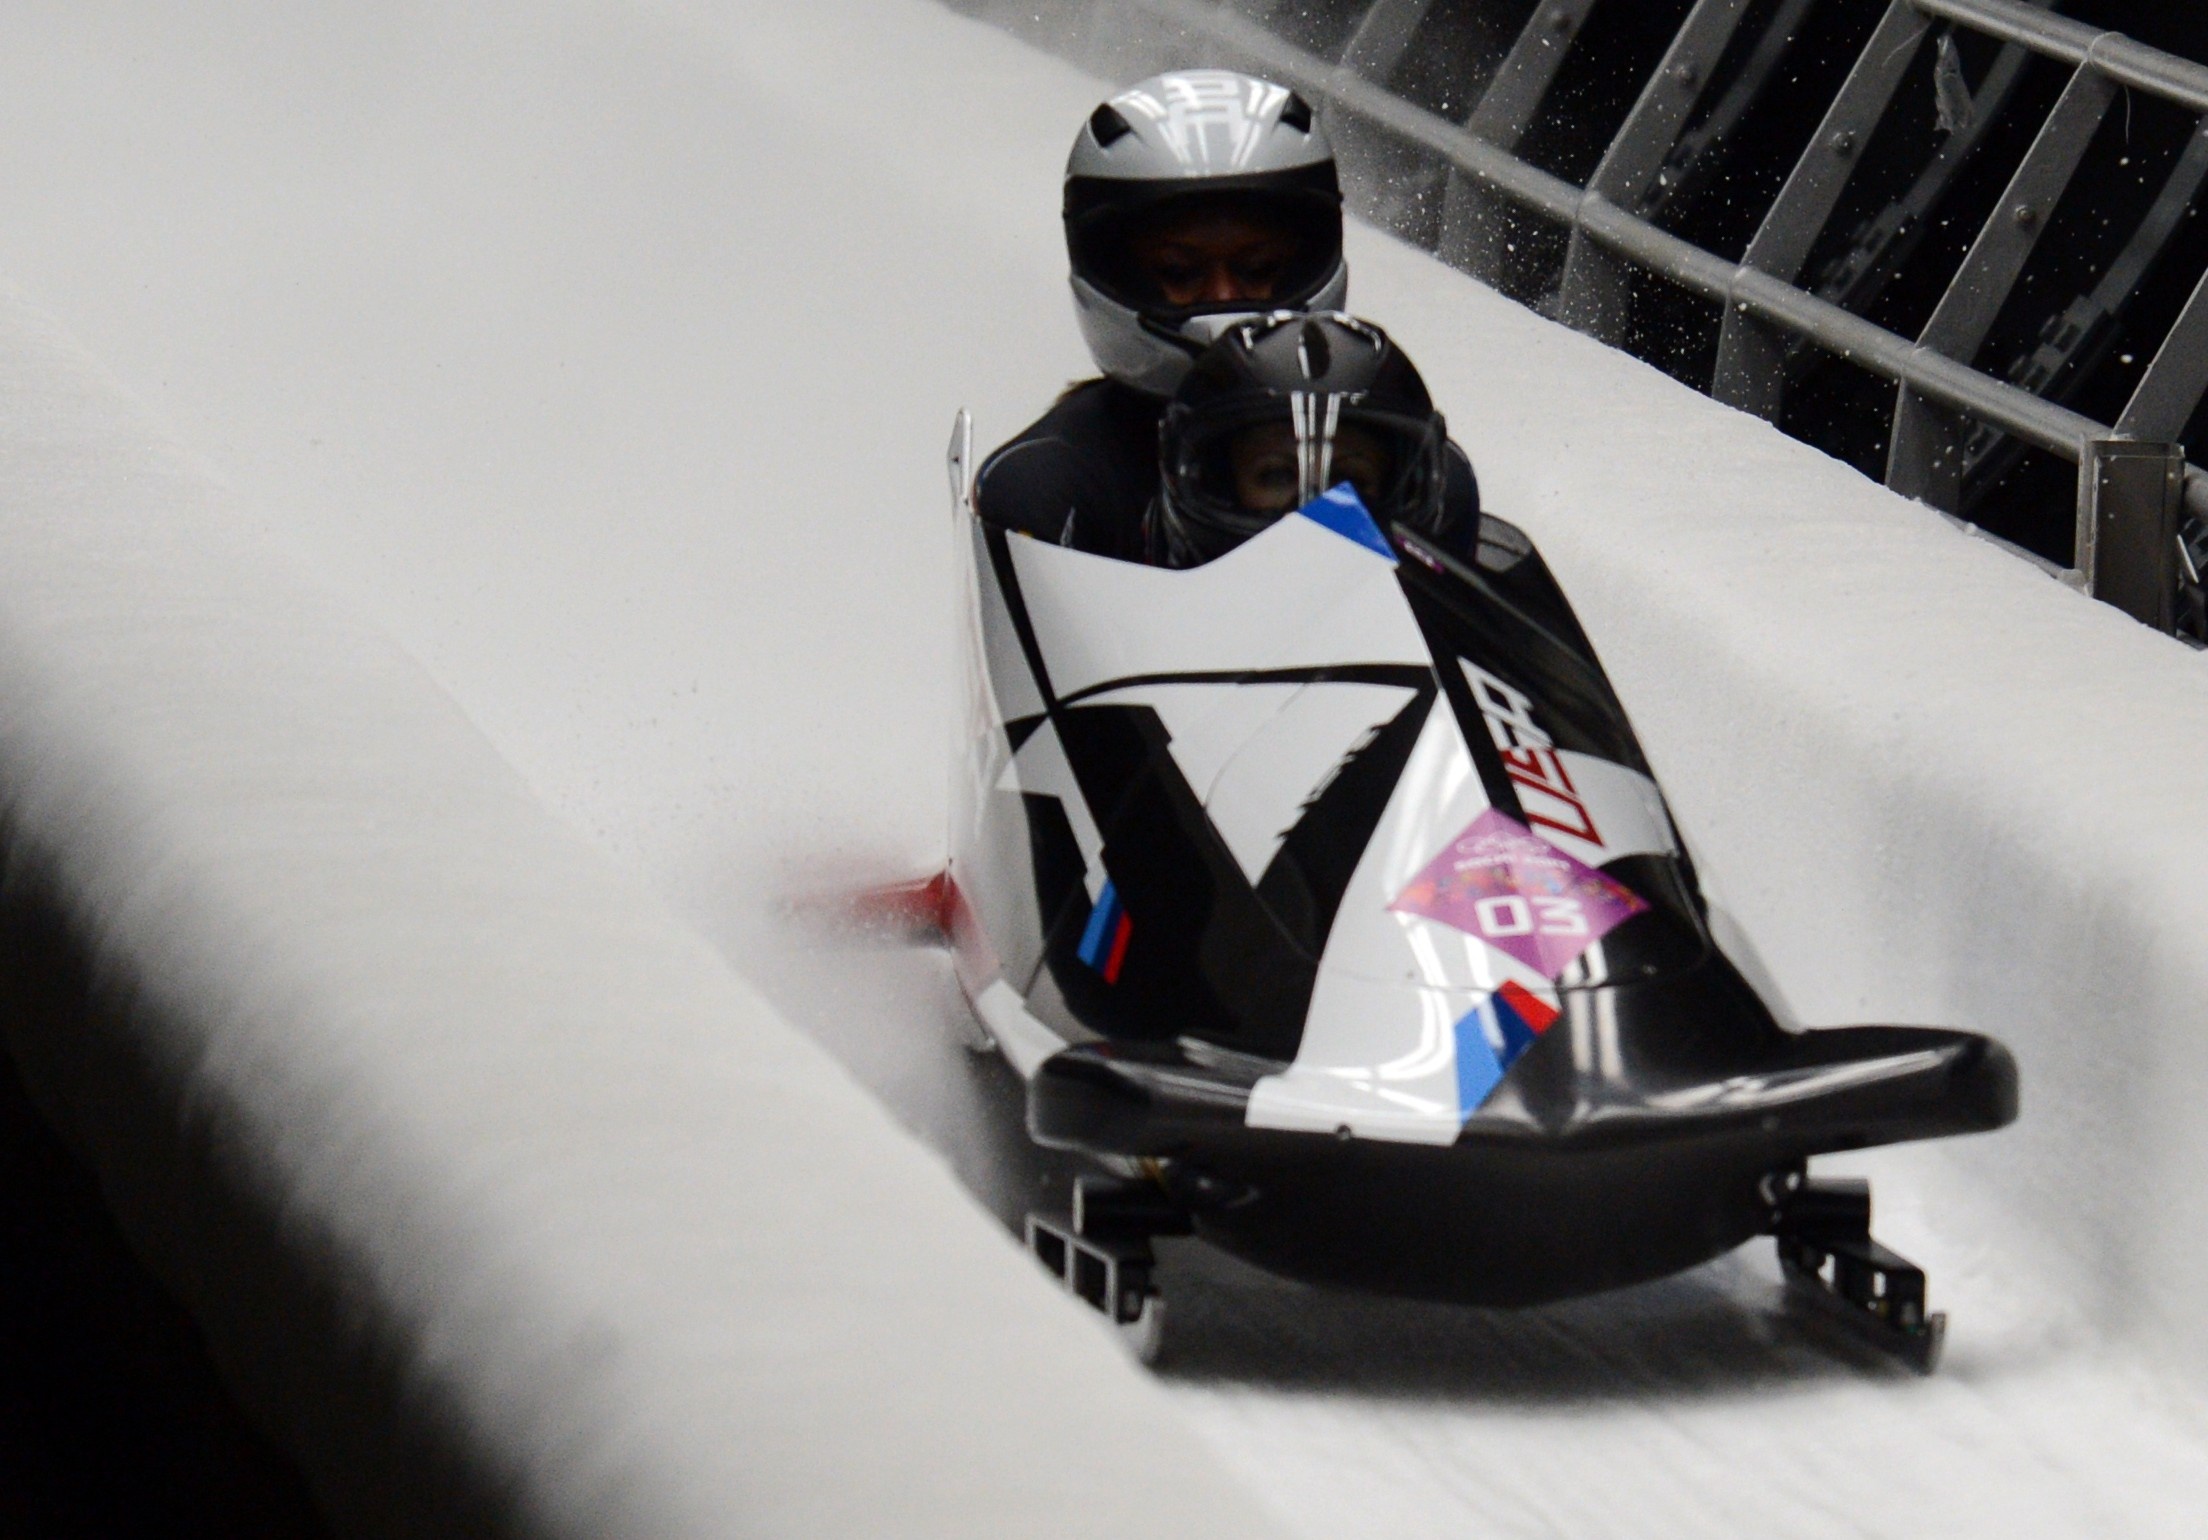 Bobsleigh: Elana Meyers and Lauryn Williams during the women's bobsled heats at the Sochi 2014. 2210x1540 HD Wallpaper.